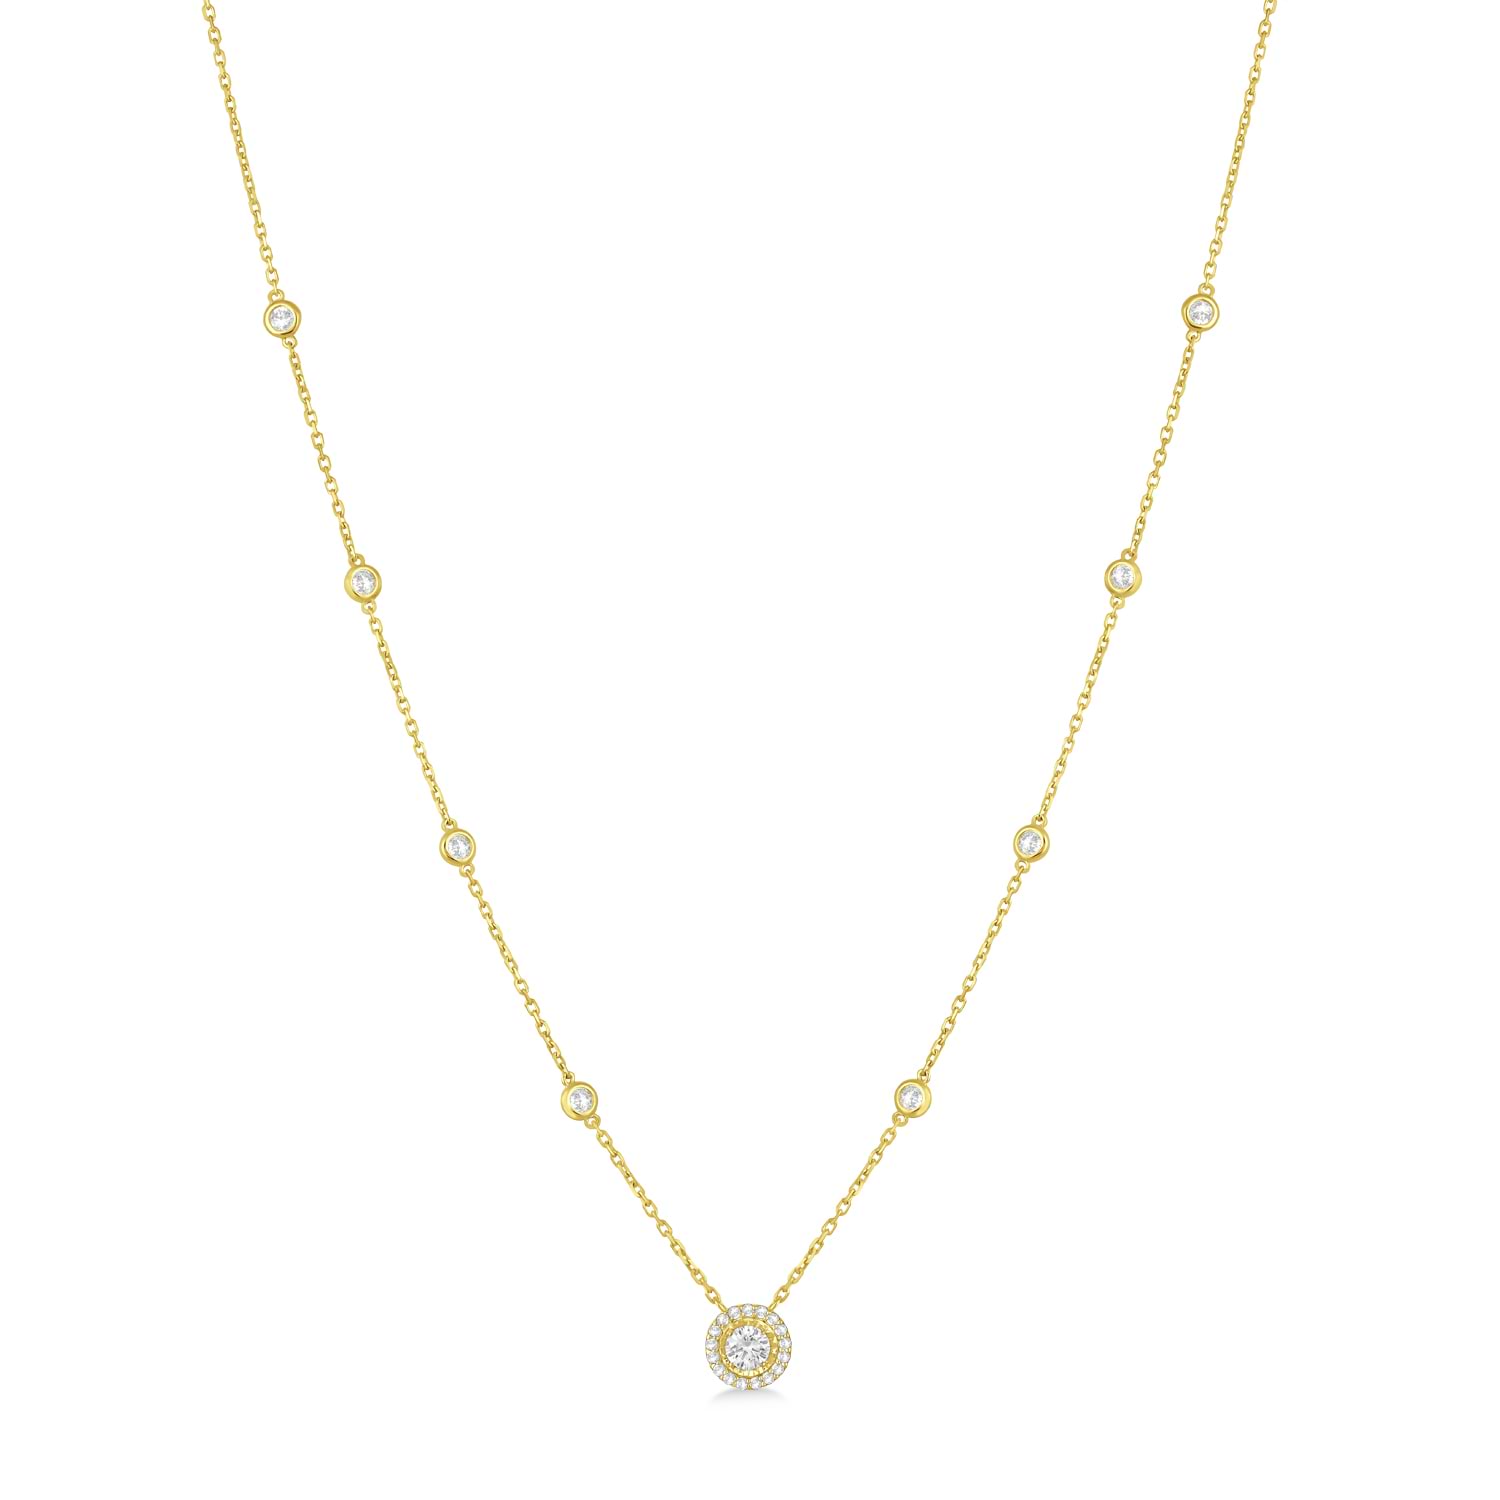 Diamond Halo Pendant Station Necklace in 14k Yellow Gold (1.50 ctw)